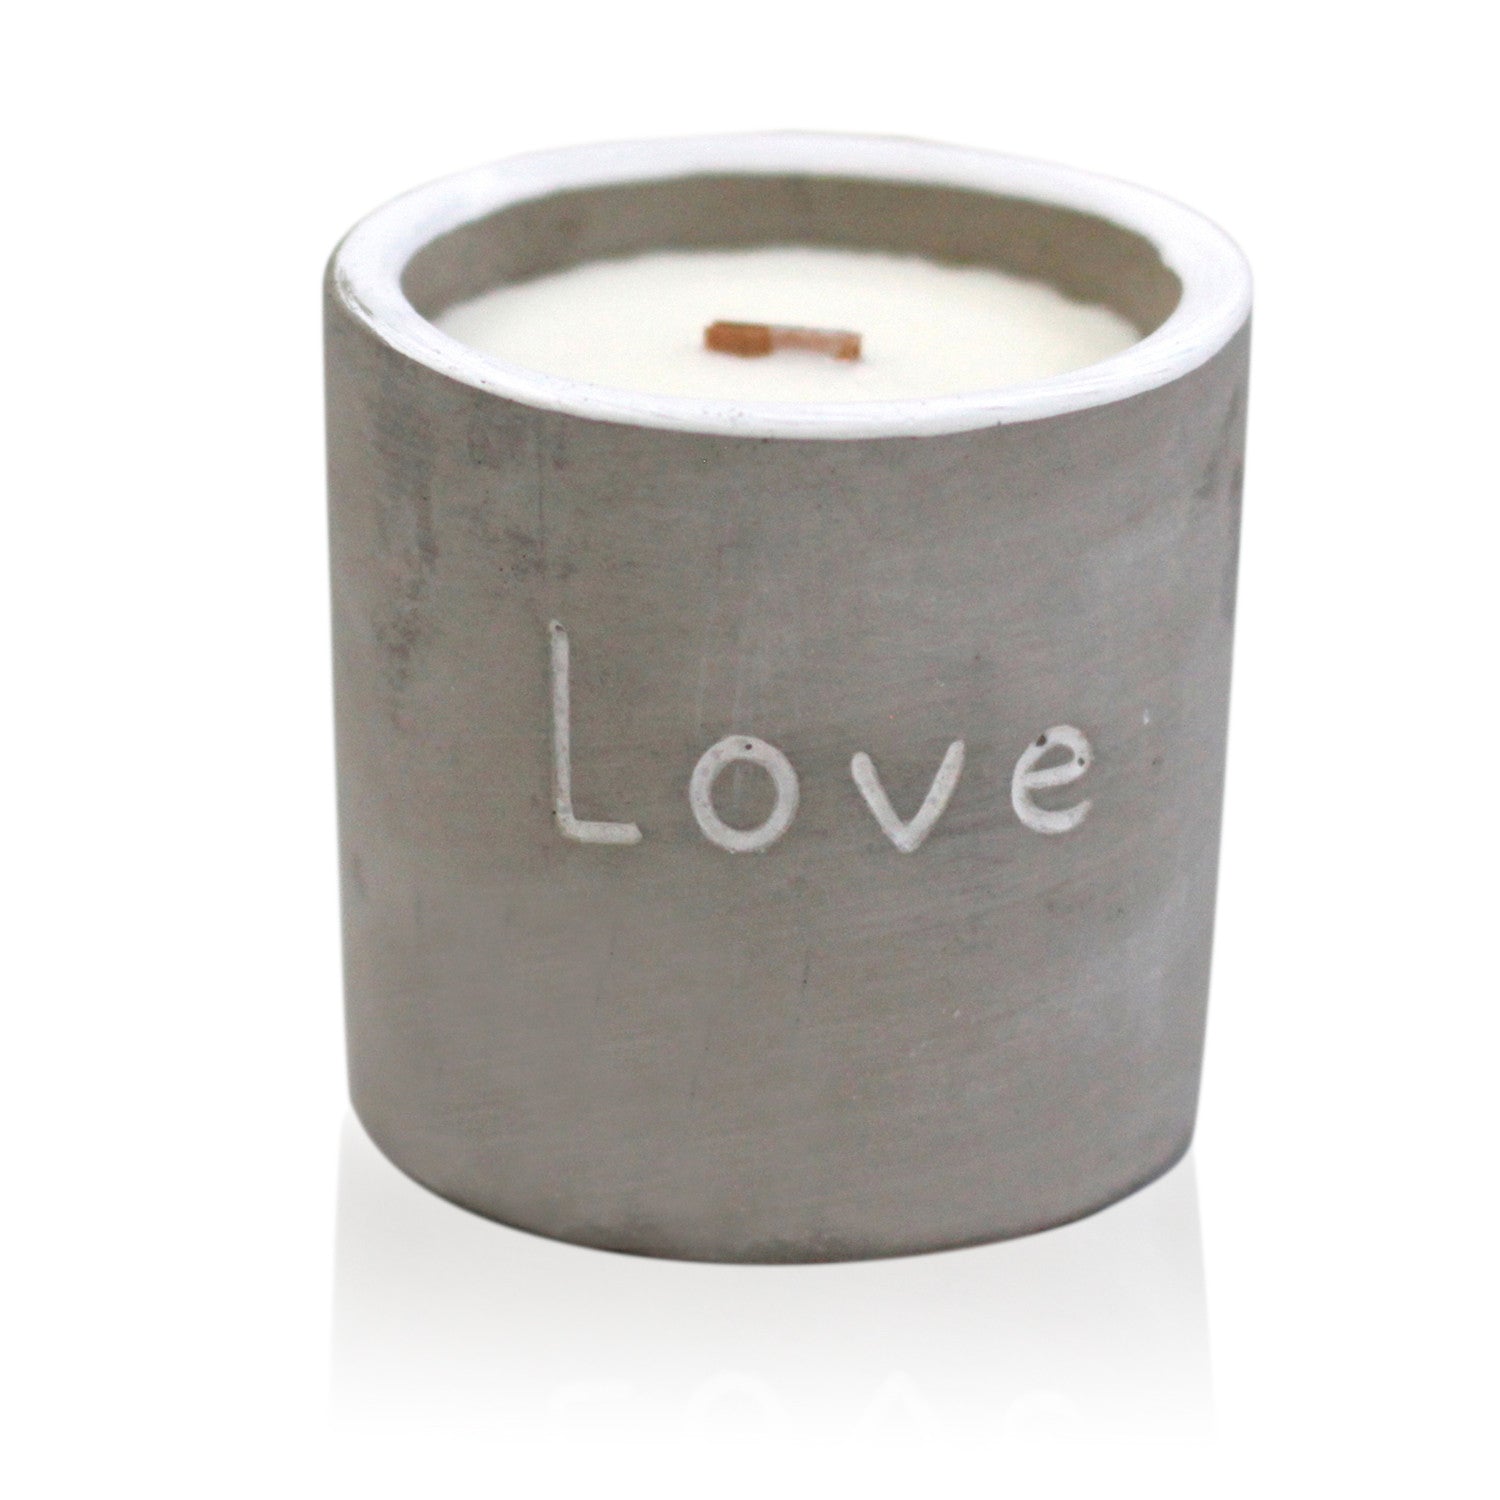 Concrete Wooden Wick Candles - Med Pot